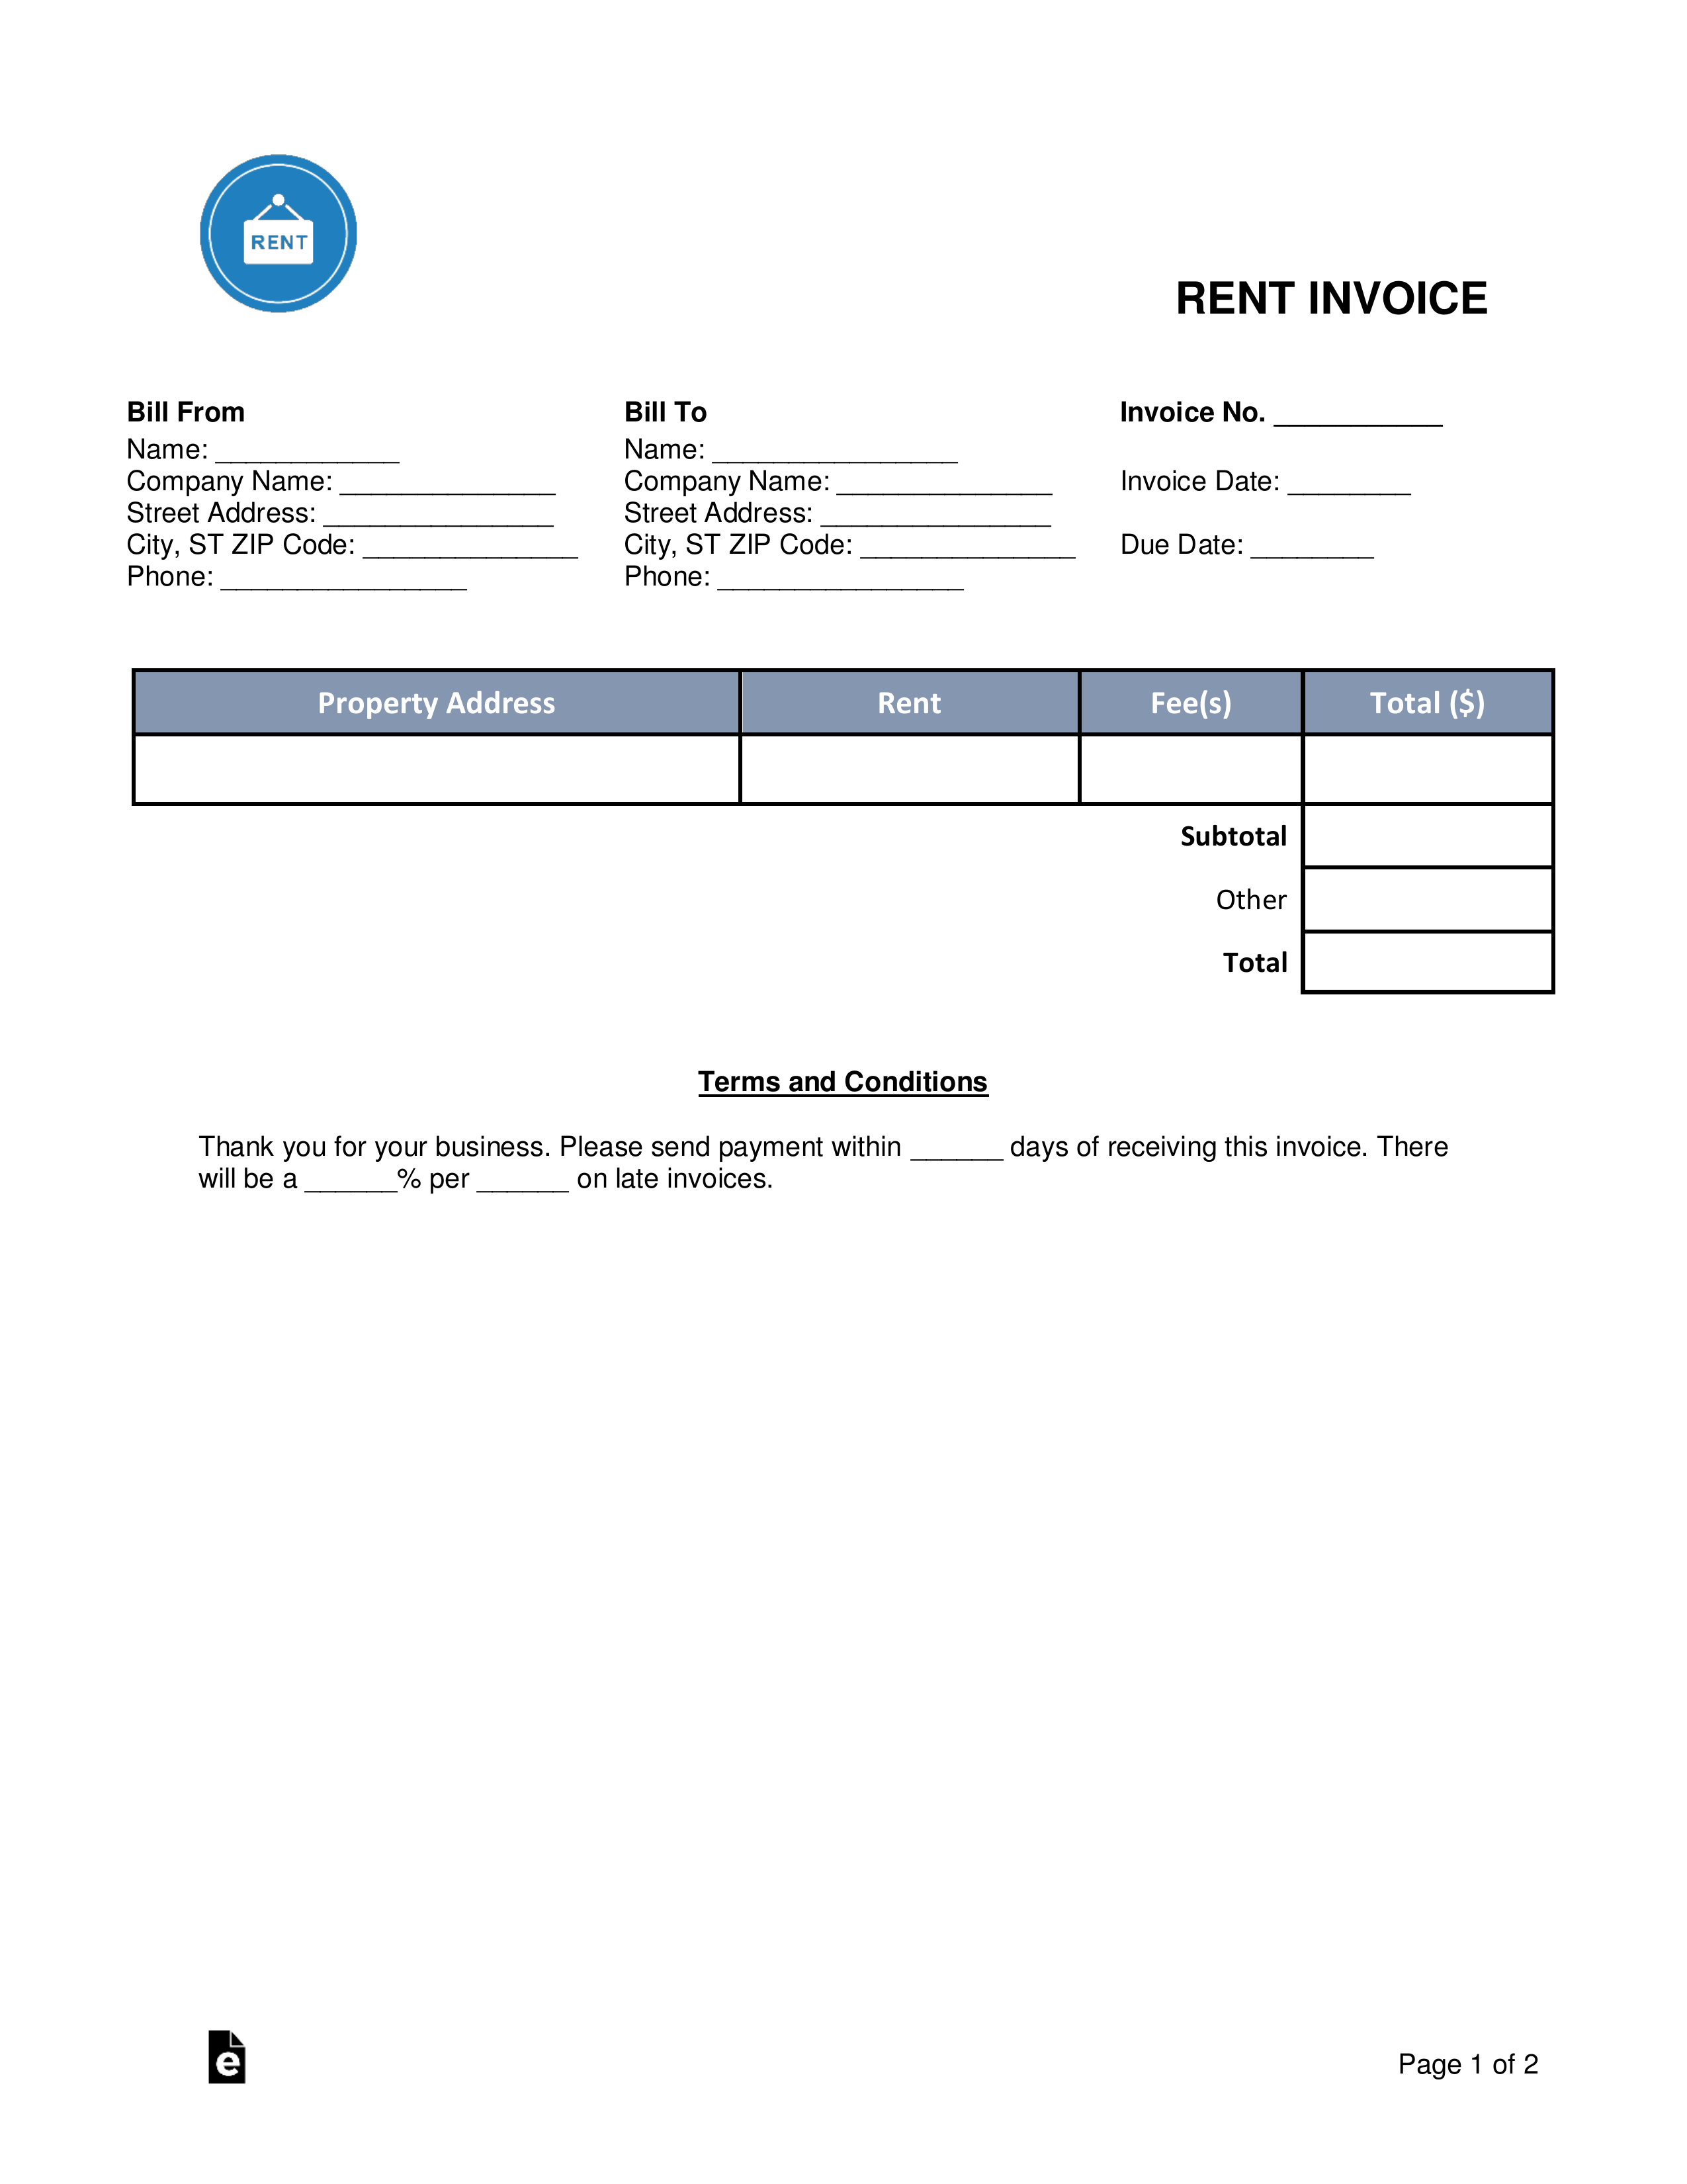 view-rent-invoice-template-pictures-invoice-template-ideas